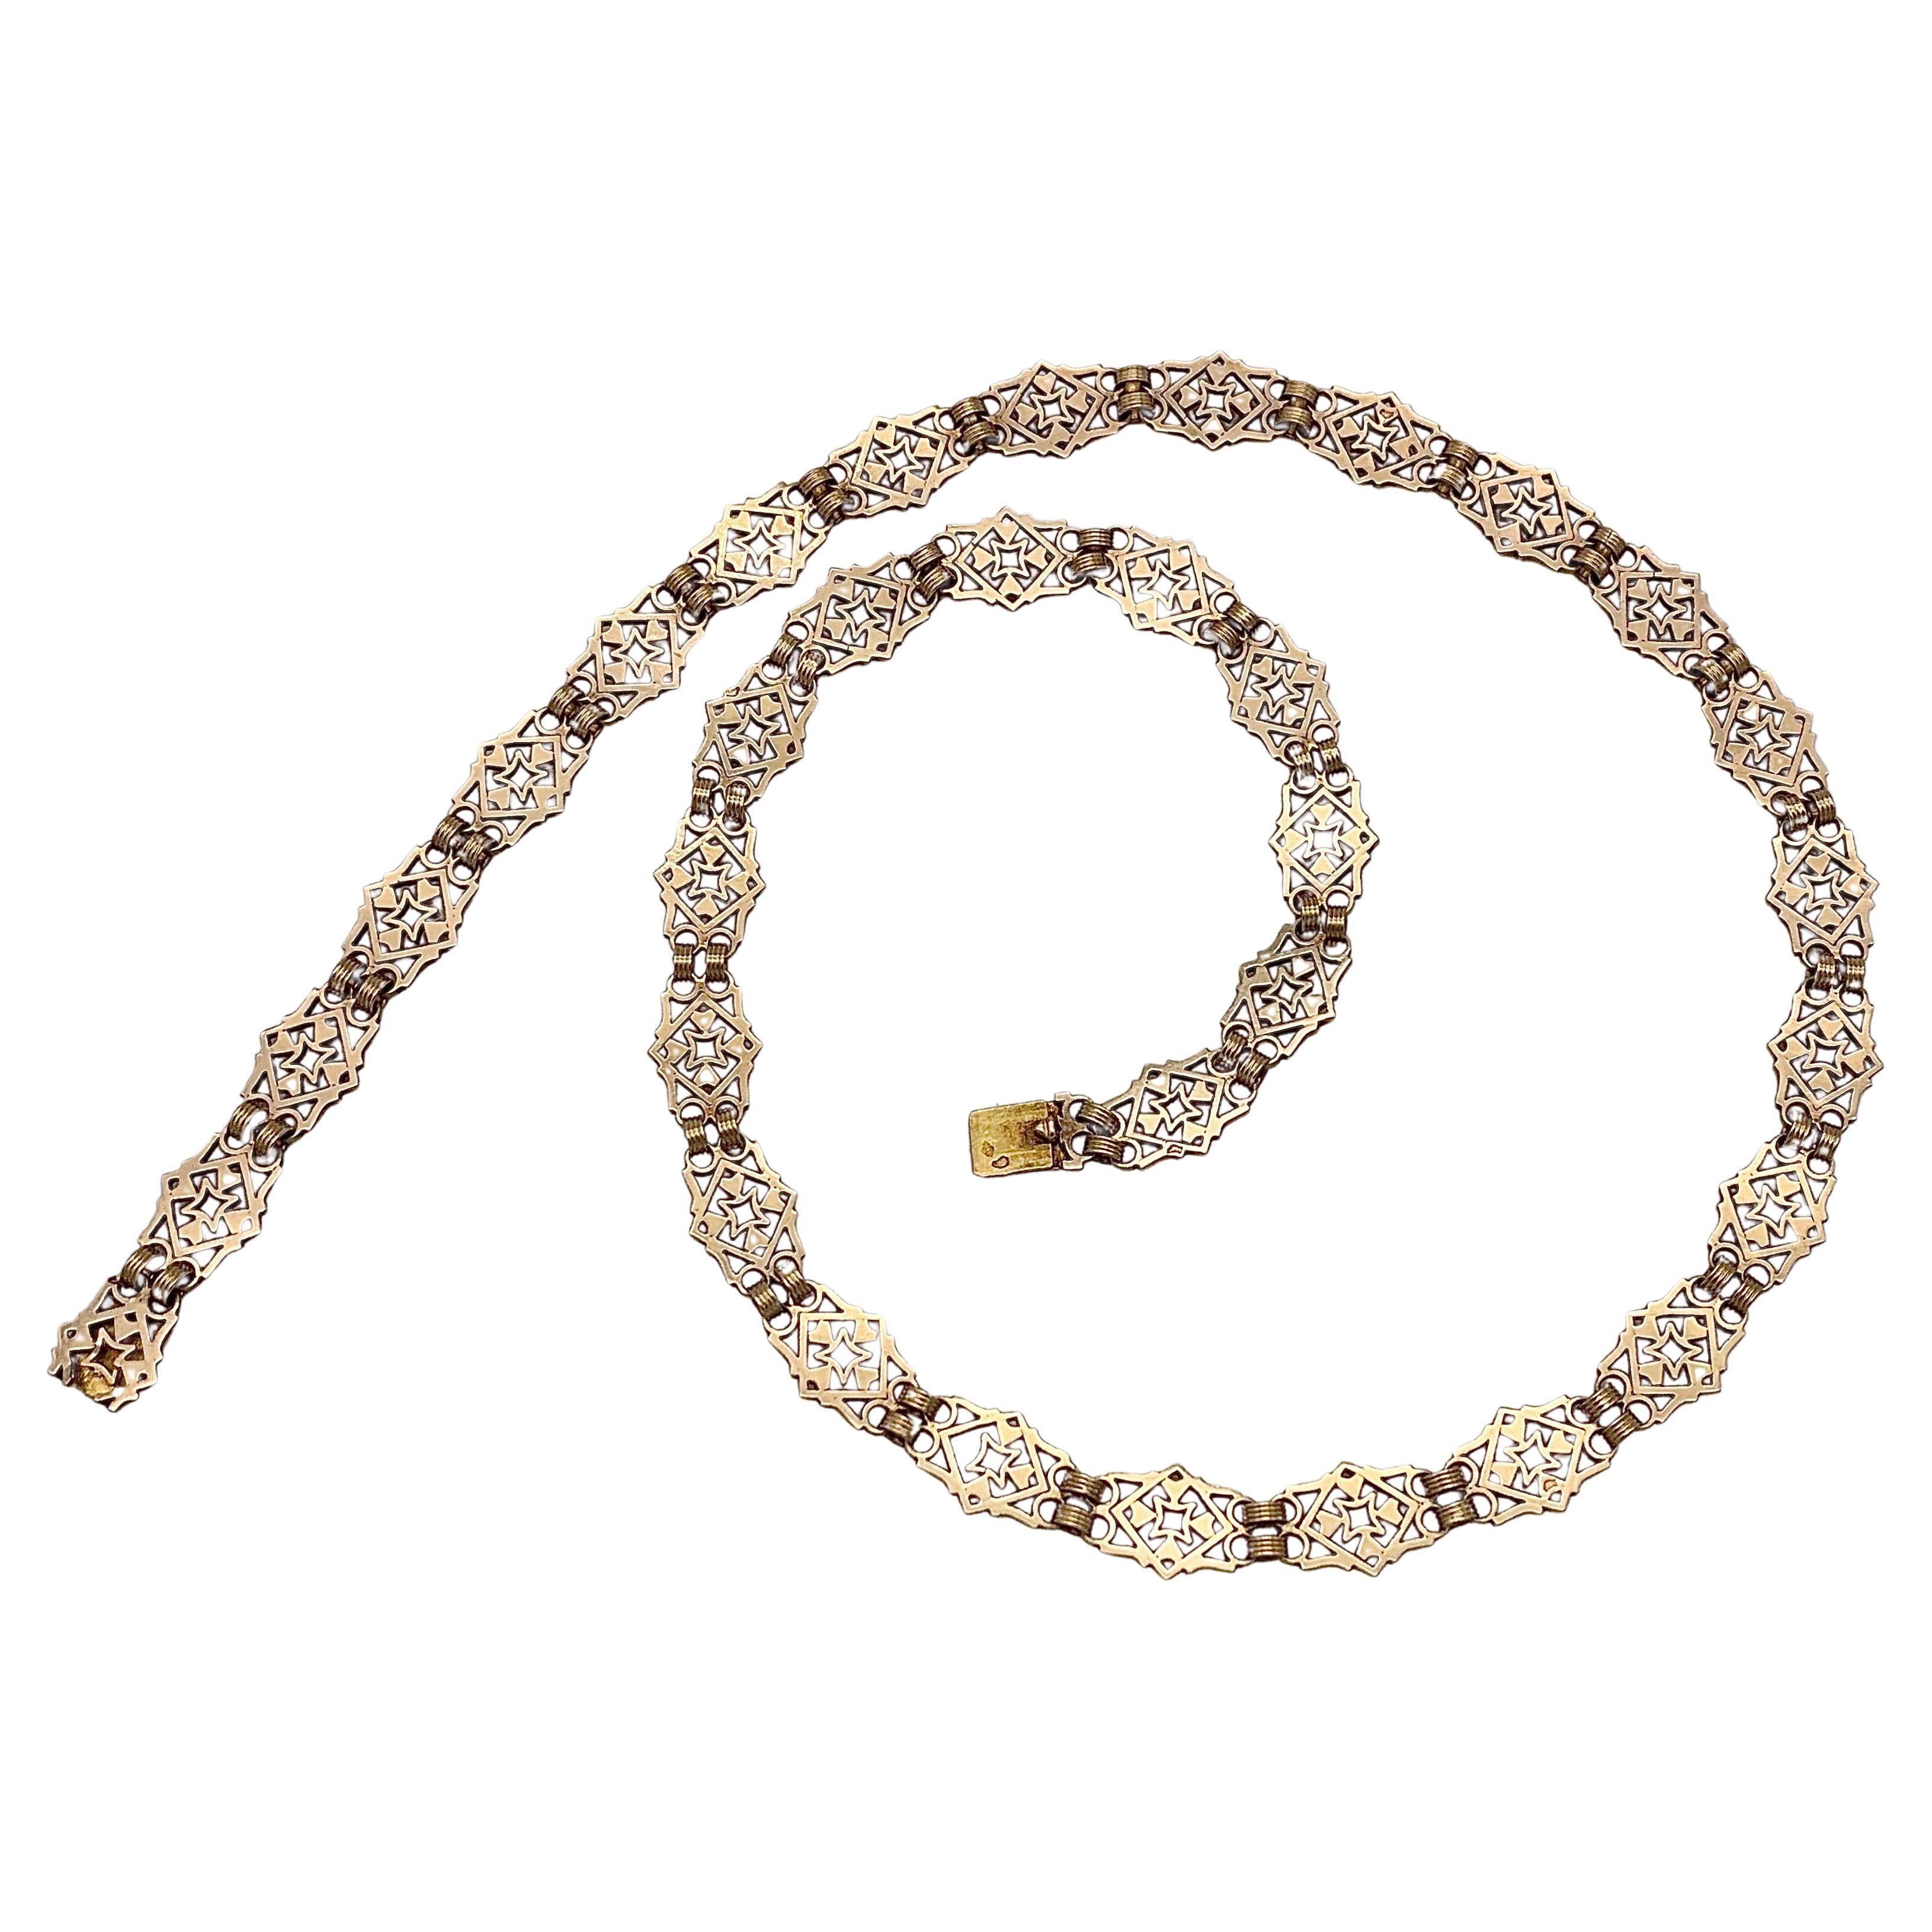 This elegant and versatile rose gold link necklace was made in France in the  1880's out of 18 karat gold. Thirty-four links with a pierced gothic revival pattern make up this necklace, one link serves as clasp. The links are connected by two wide